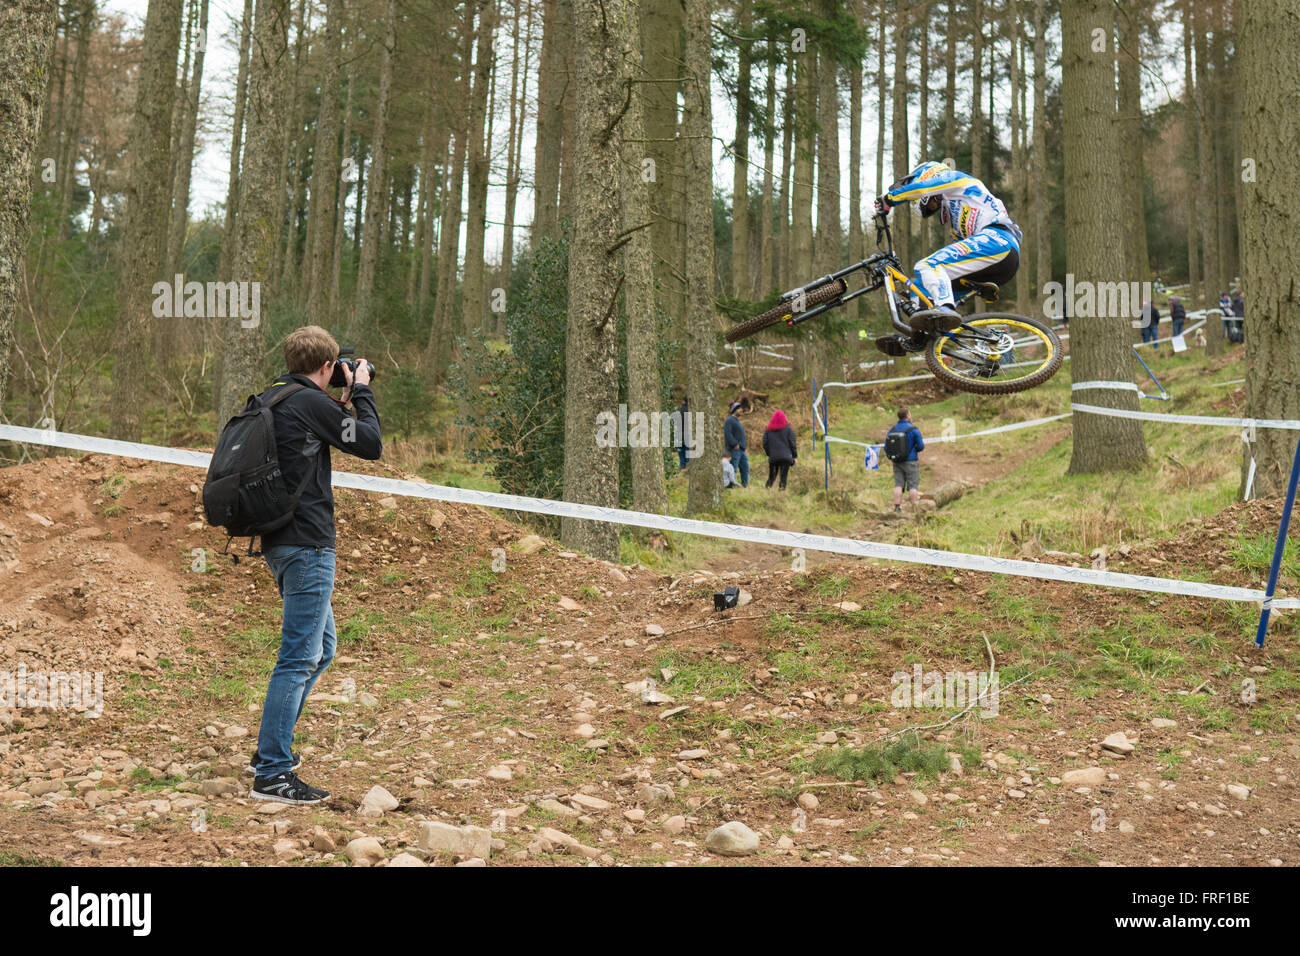 photographer capturing the action as Elliott Heap clears a jump at the 2016 SDA downhill mountain bike race at Ae forest Scotland Stock Photo